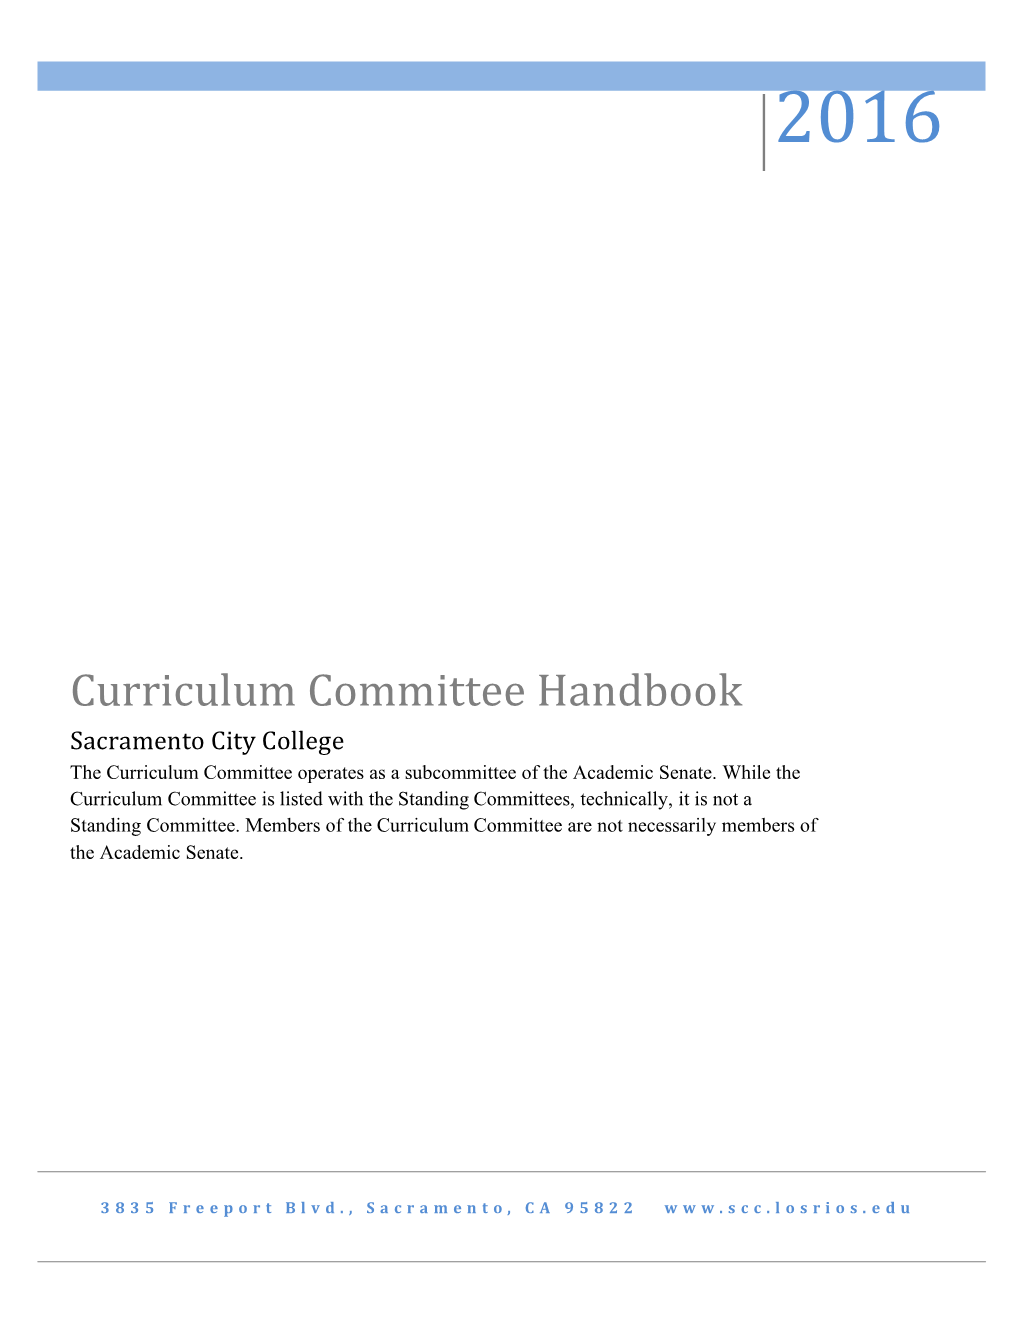 Curriculum Committee Handbook Sacramento City College the Curriculum Committee Operates As a Subcommittee of the Academic Senate